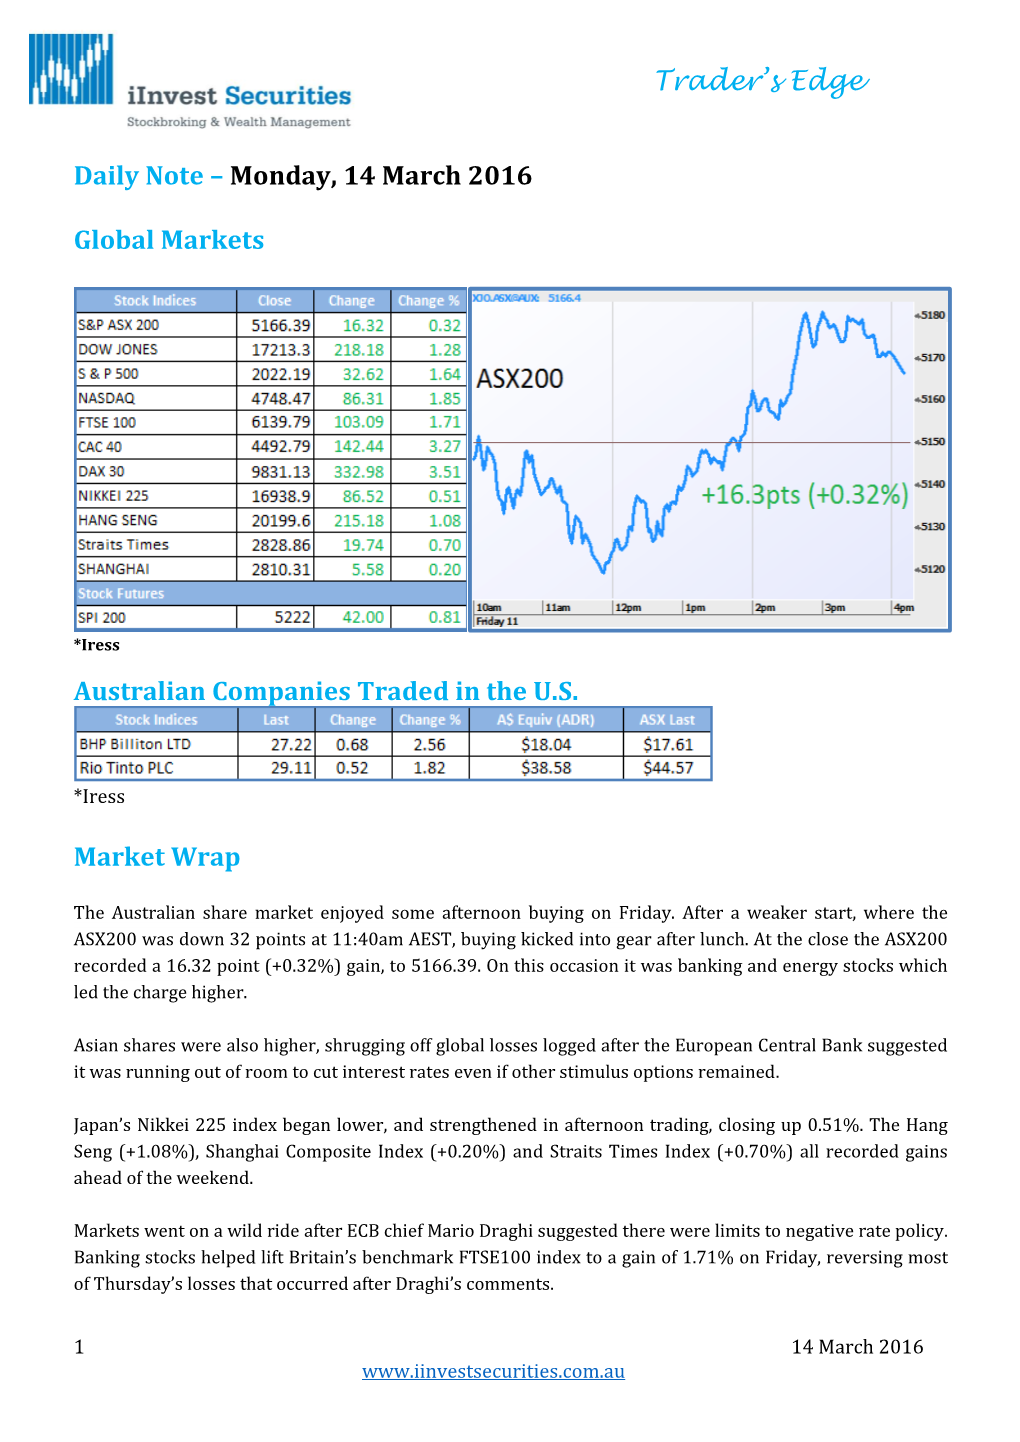 Trader's Edge Daily Note – Monday, 14 March